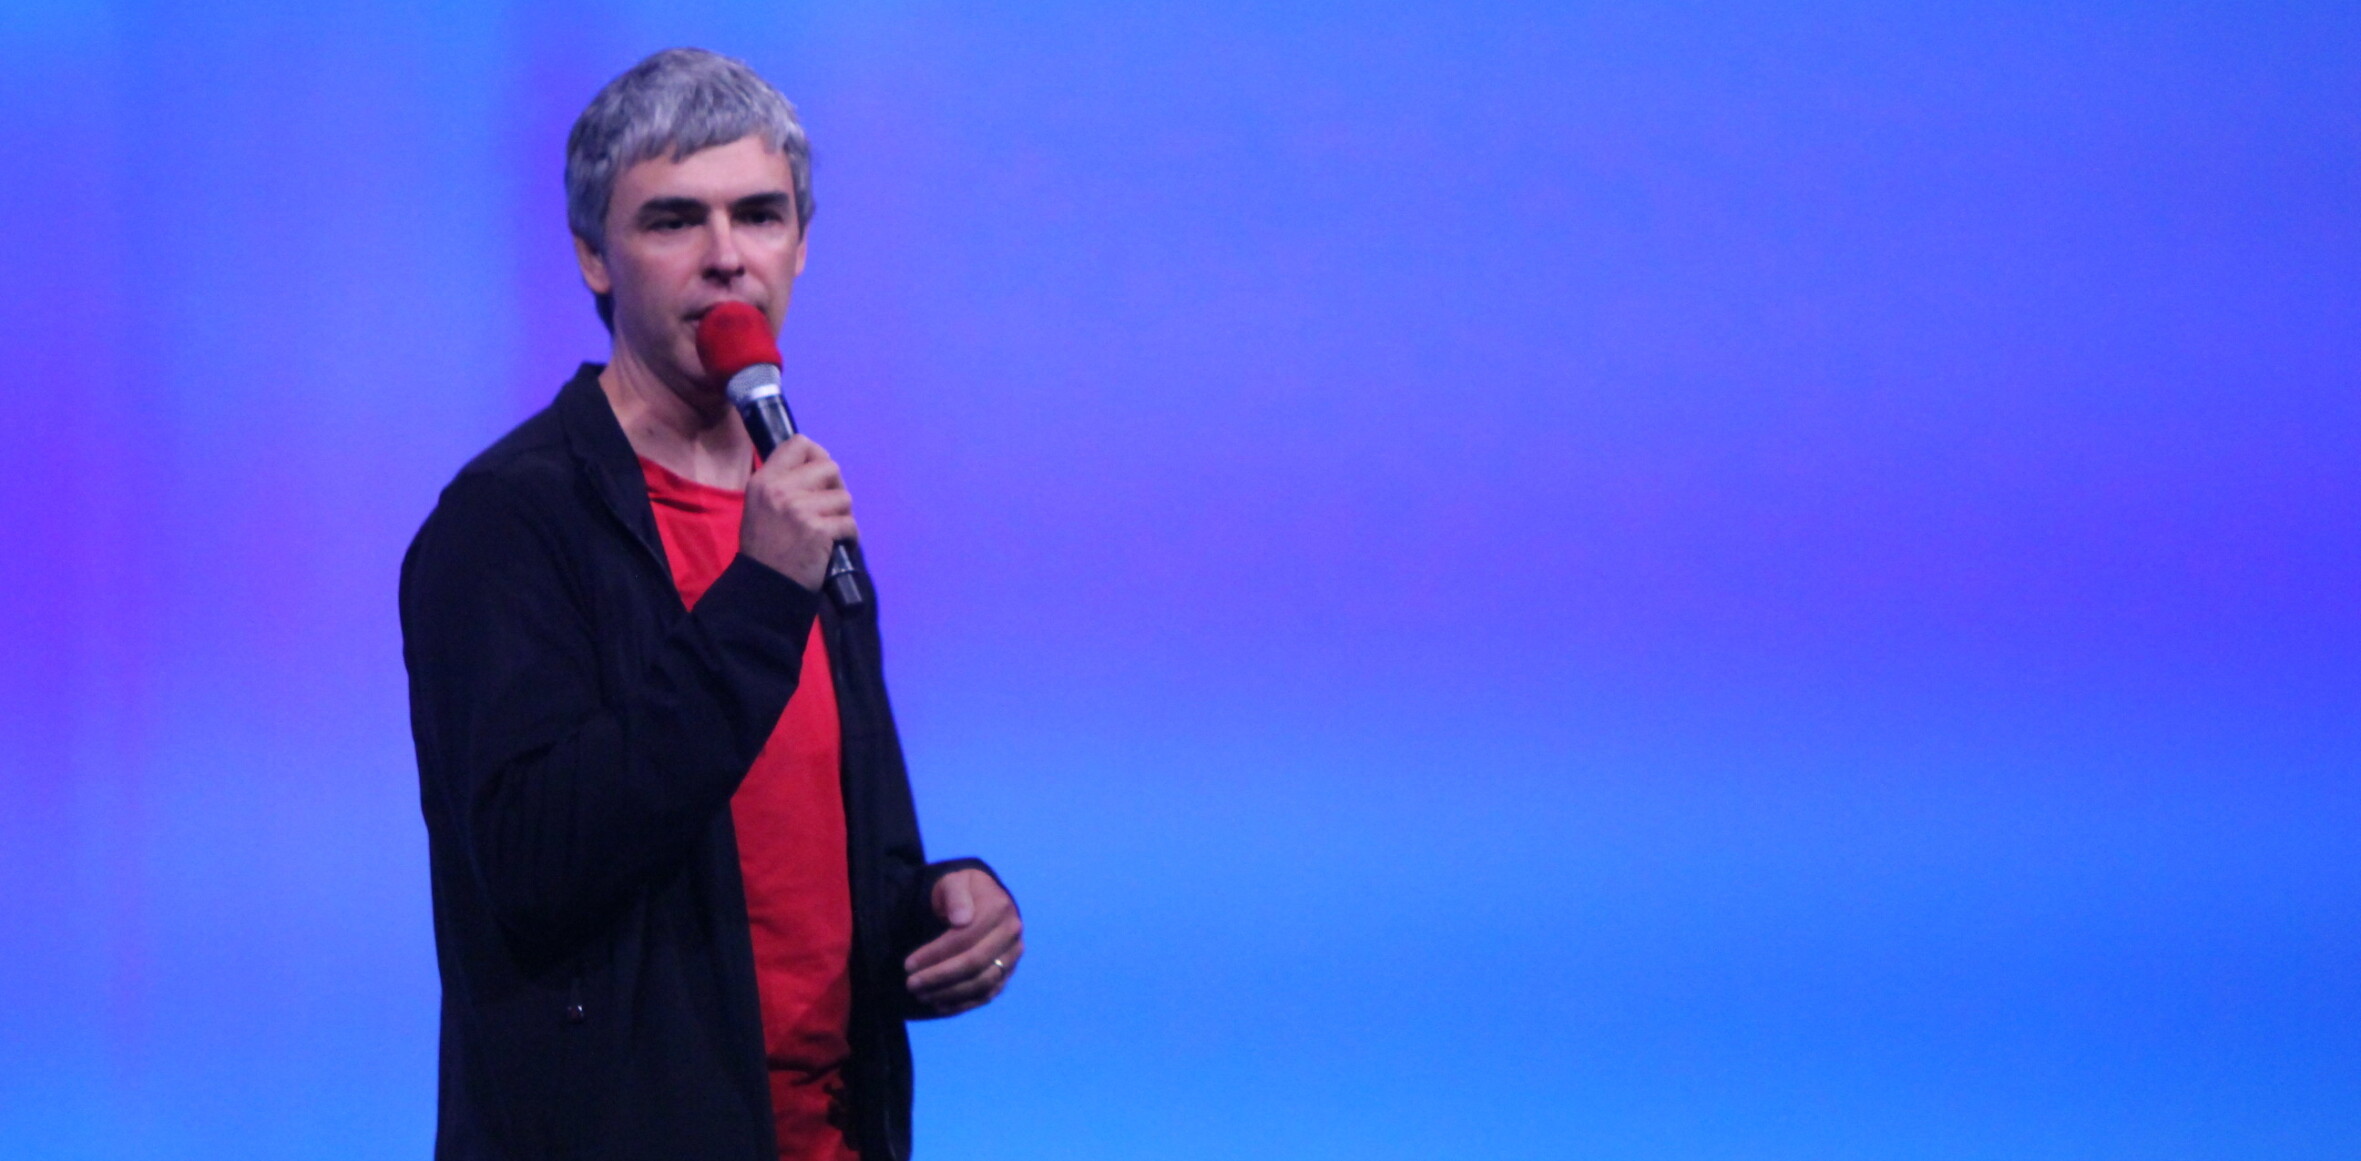 Google CEO Larry Page speaks at I/O about competition and negativity in innovation